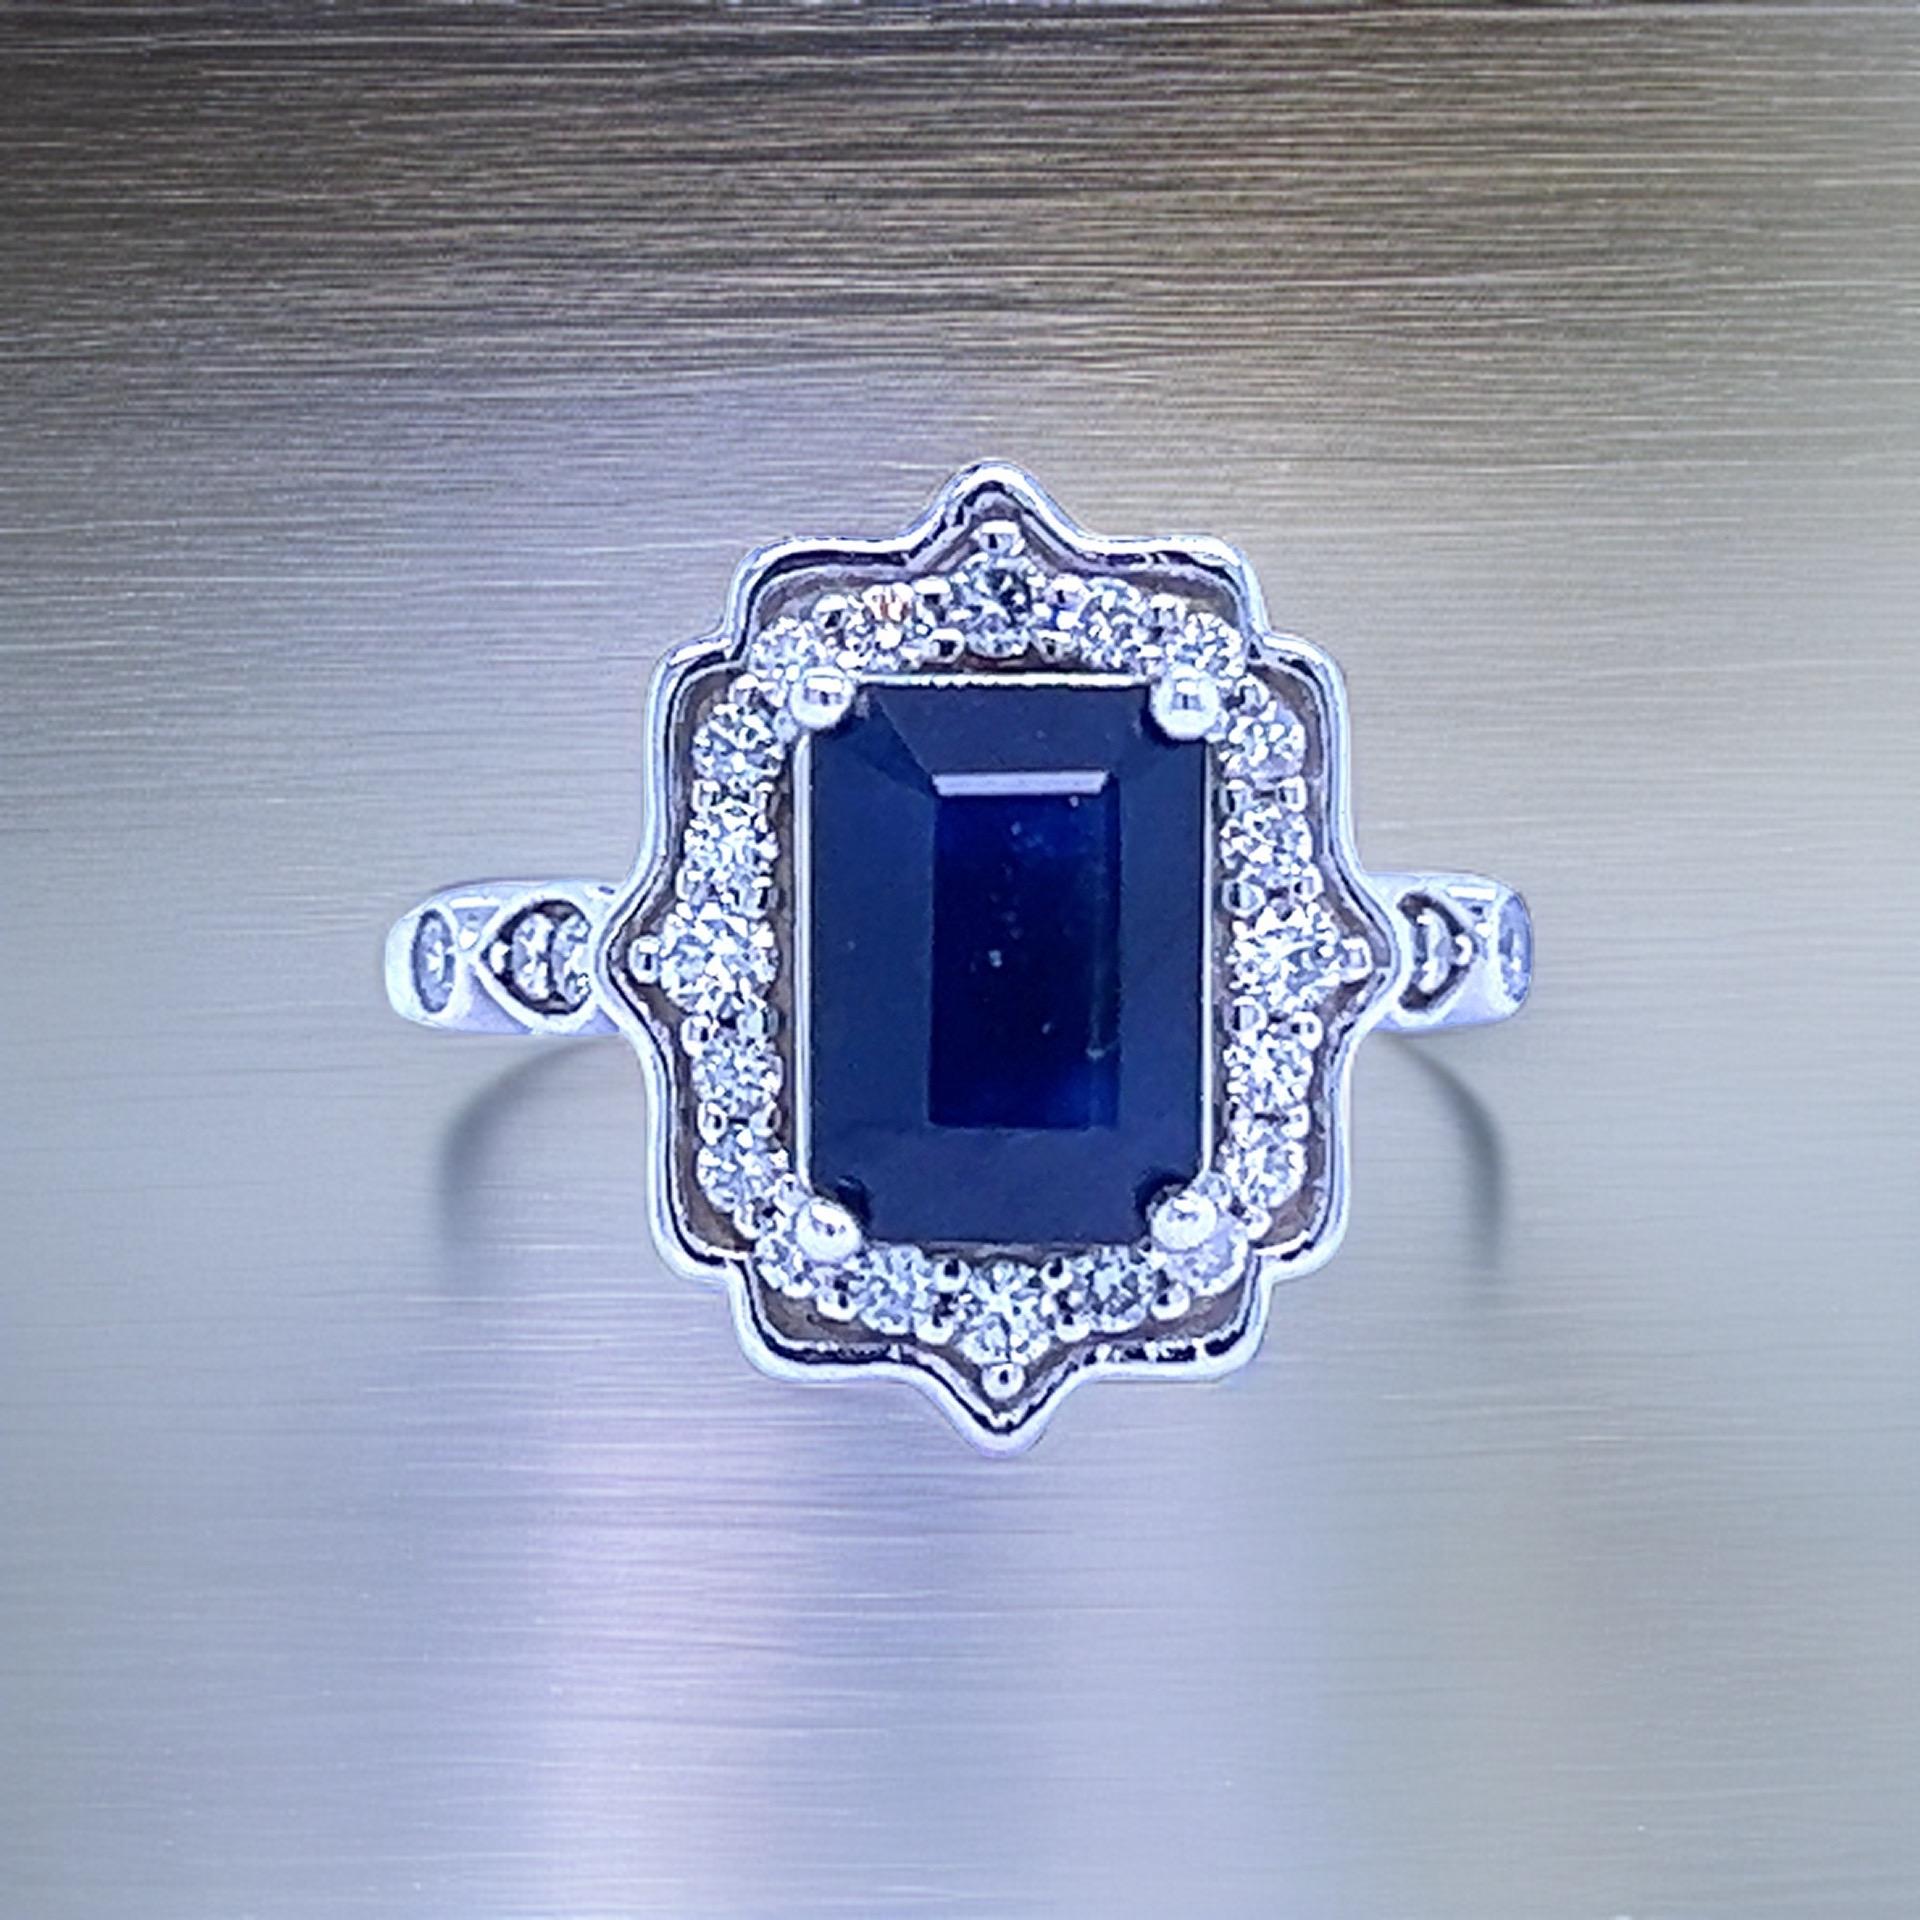 Natural Sapphire Diamond Ring 6.5 14k White Gold 3.51 TCW Certified For Sale 4